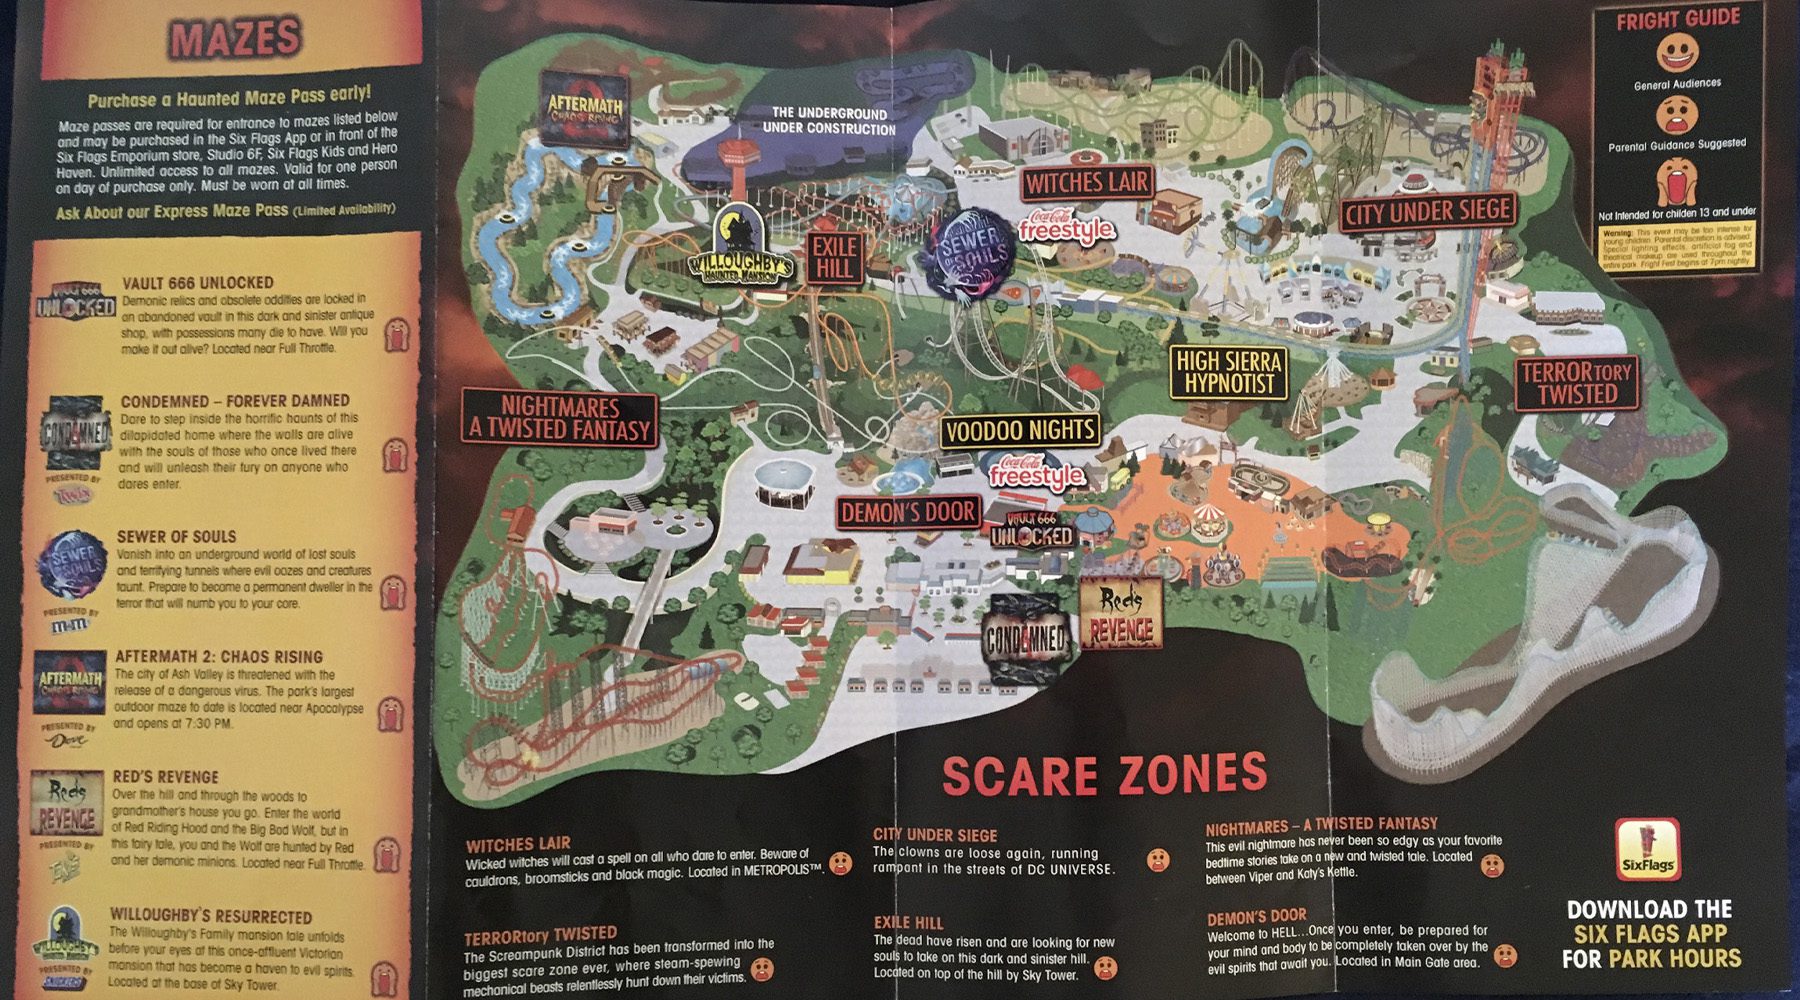 2019 SiX Flags Fright Fest Map Guide